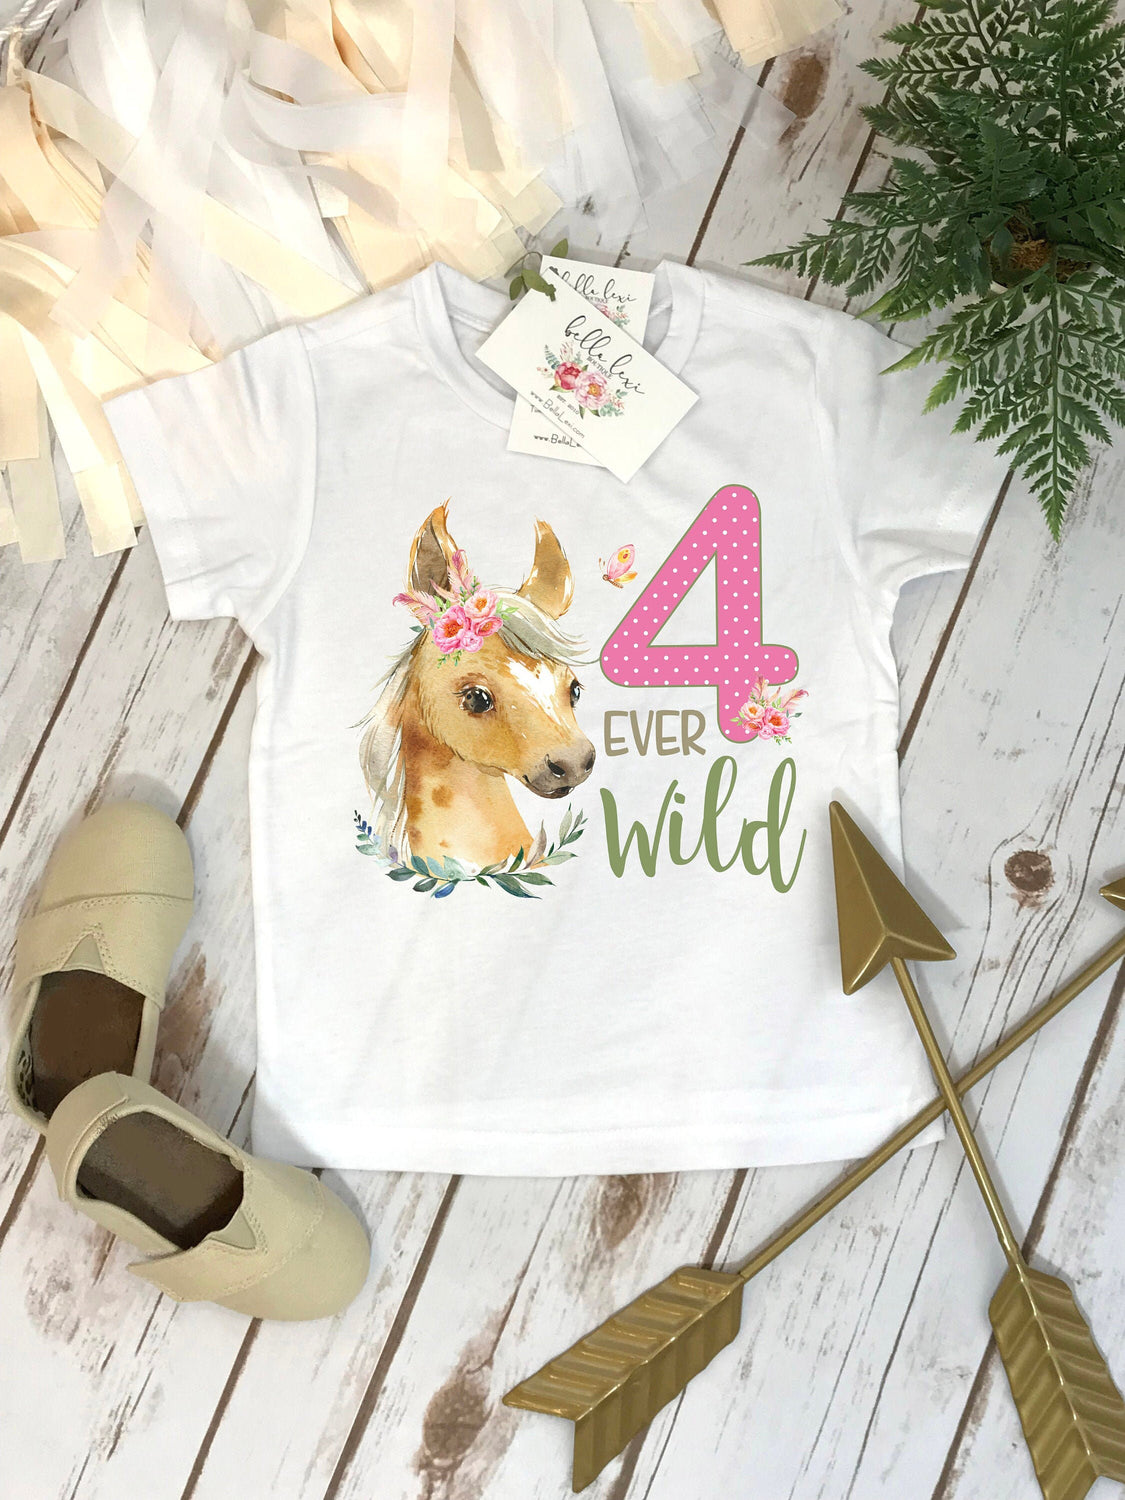 Fourth Birthday, Four Ever Wild, Horse Birthday, 4th Birthday, Pony Birthday, Horse Party, Girl Birthday Shirt, For Ever Wild, Stable Party